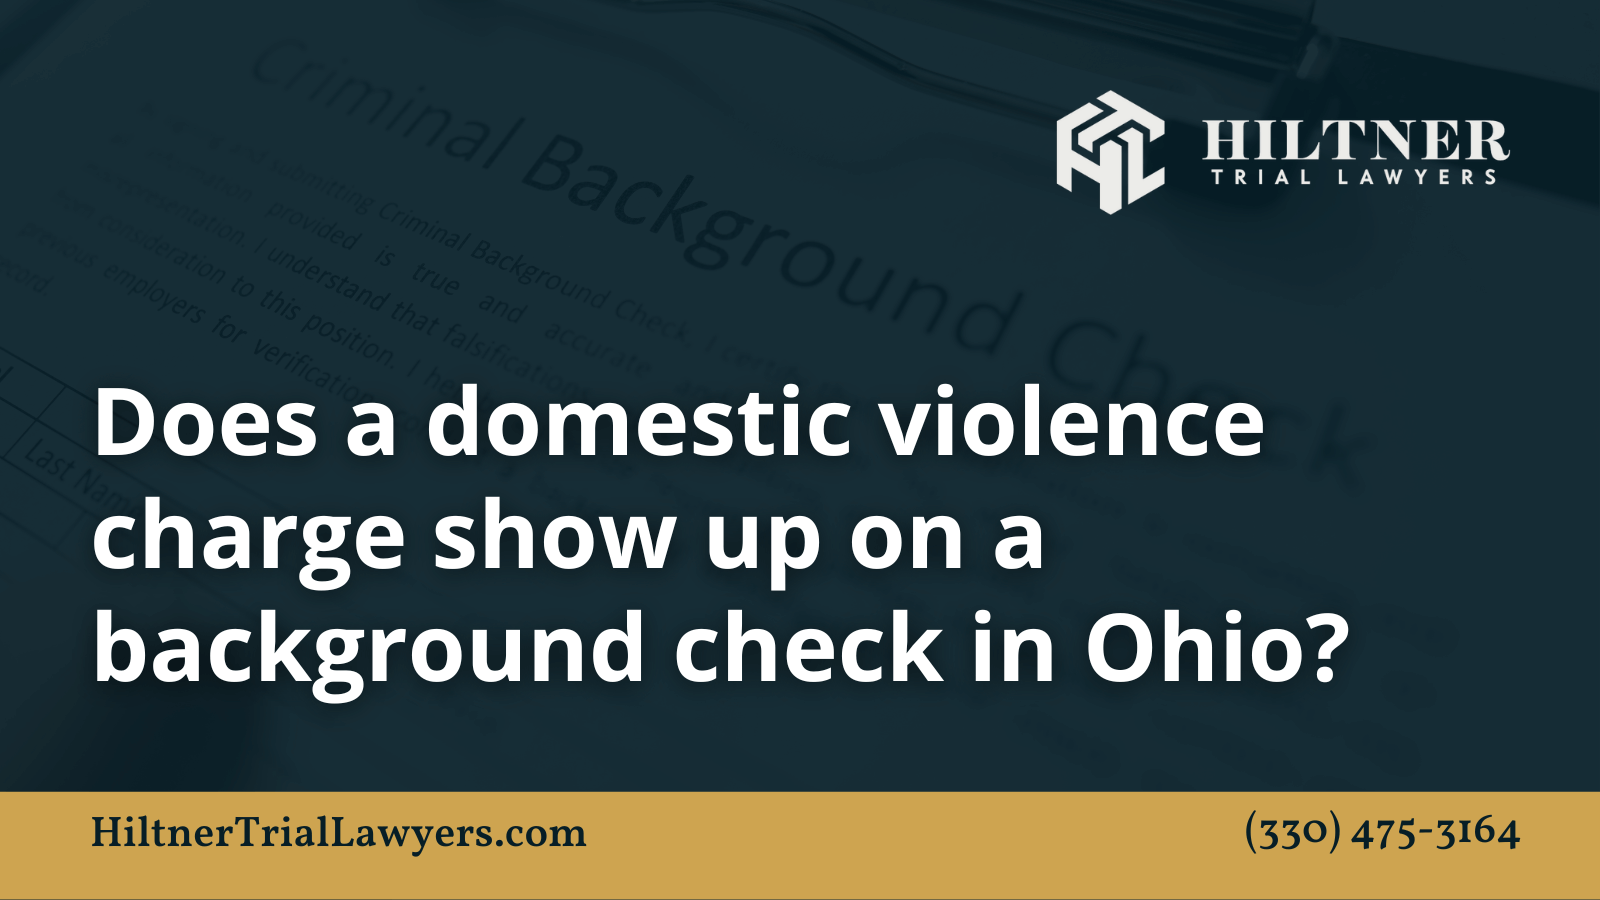 Does a domestic violence charge show up on a background check in Ohio - Hiltner Trial Lawyers Ohio - max hiltner